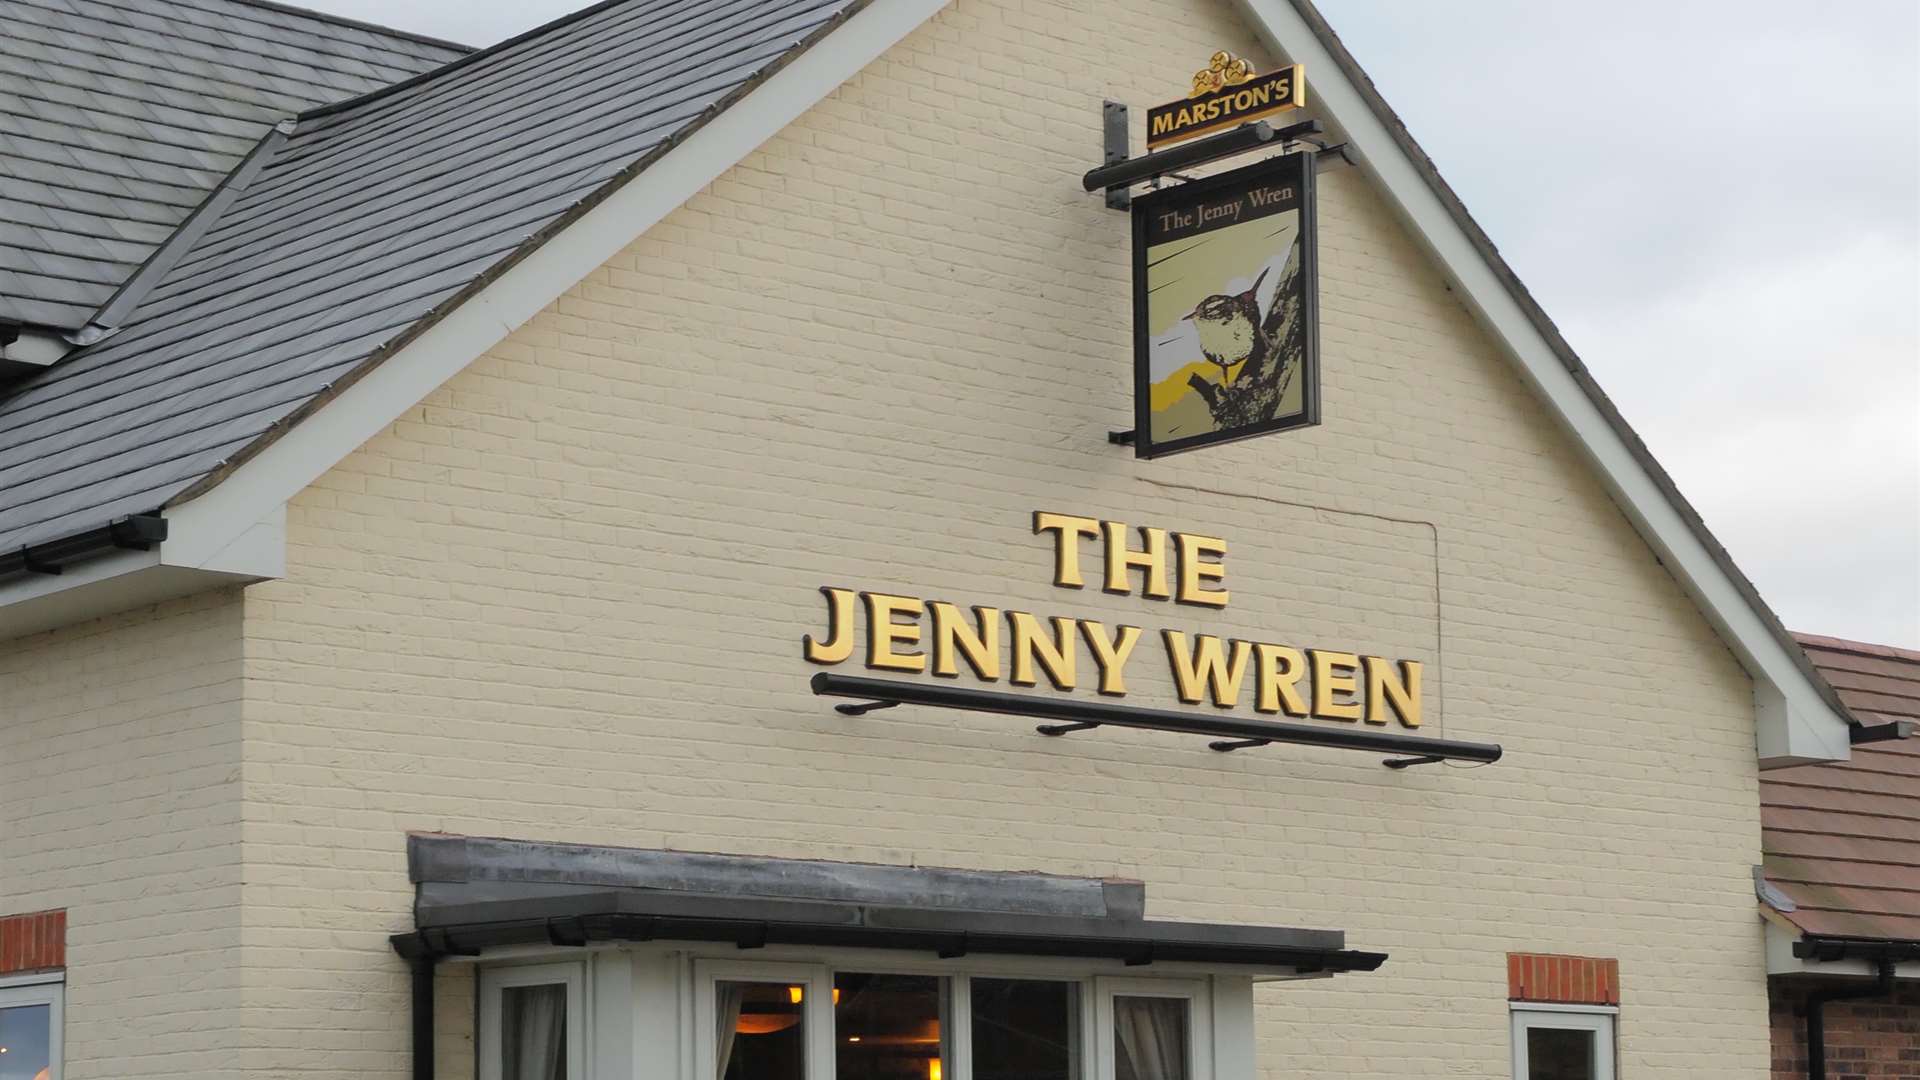 The Jenny Wren pub is set to be open for vote casting business